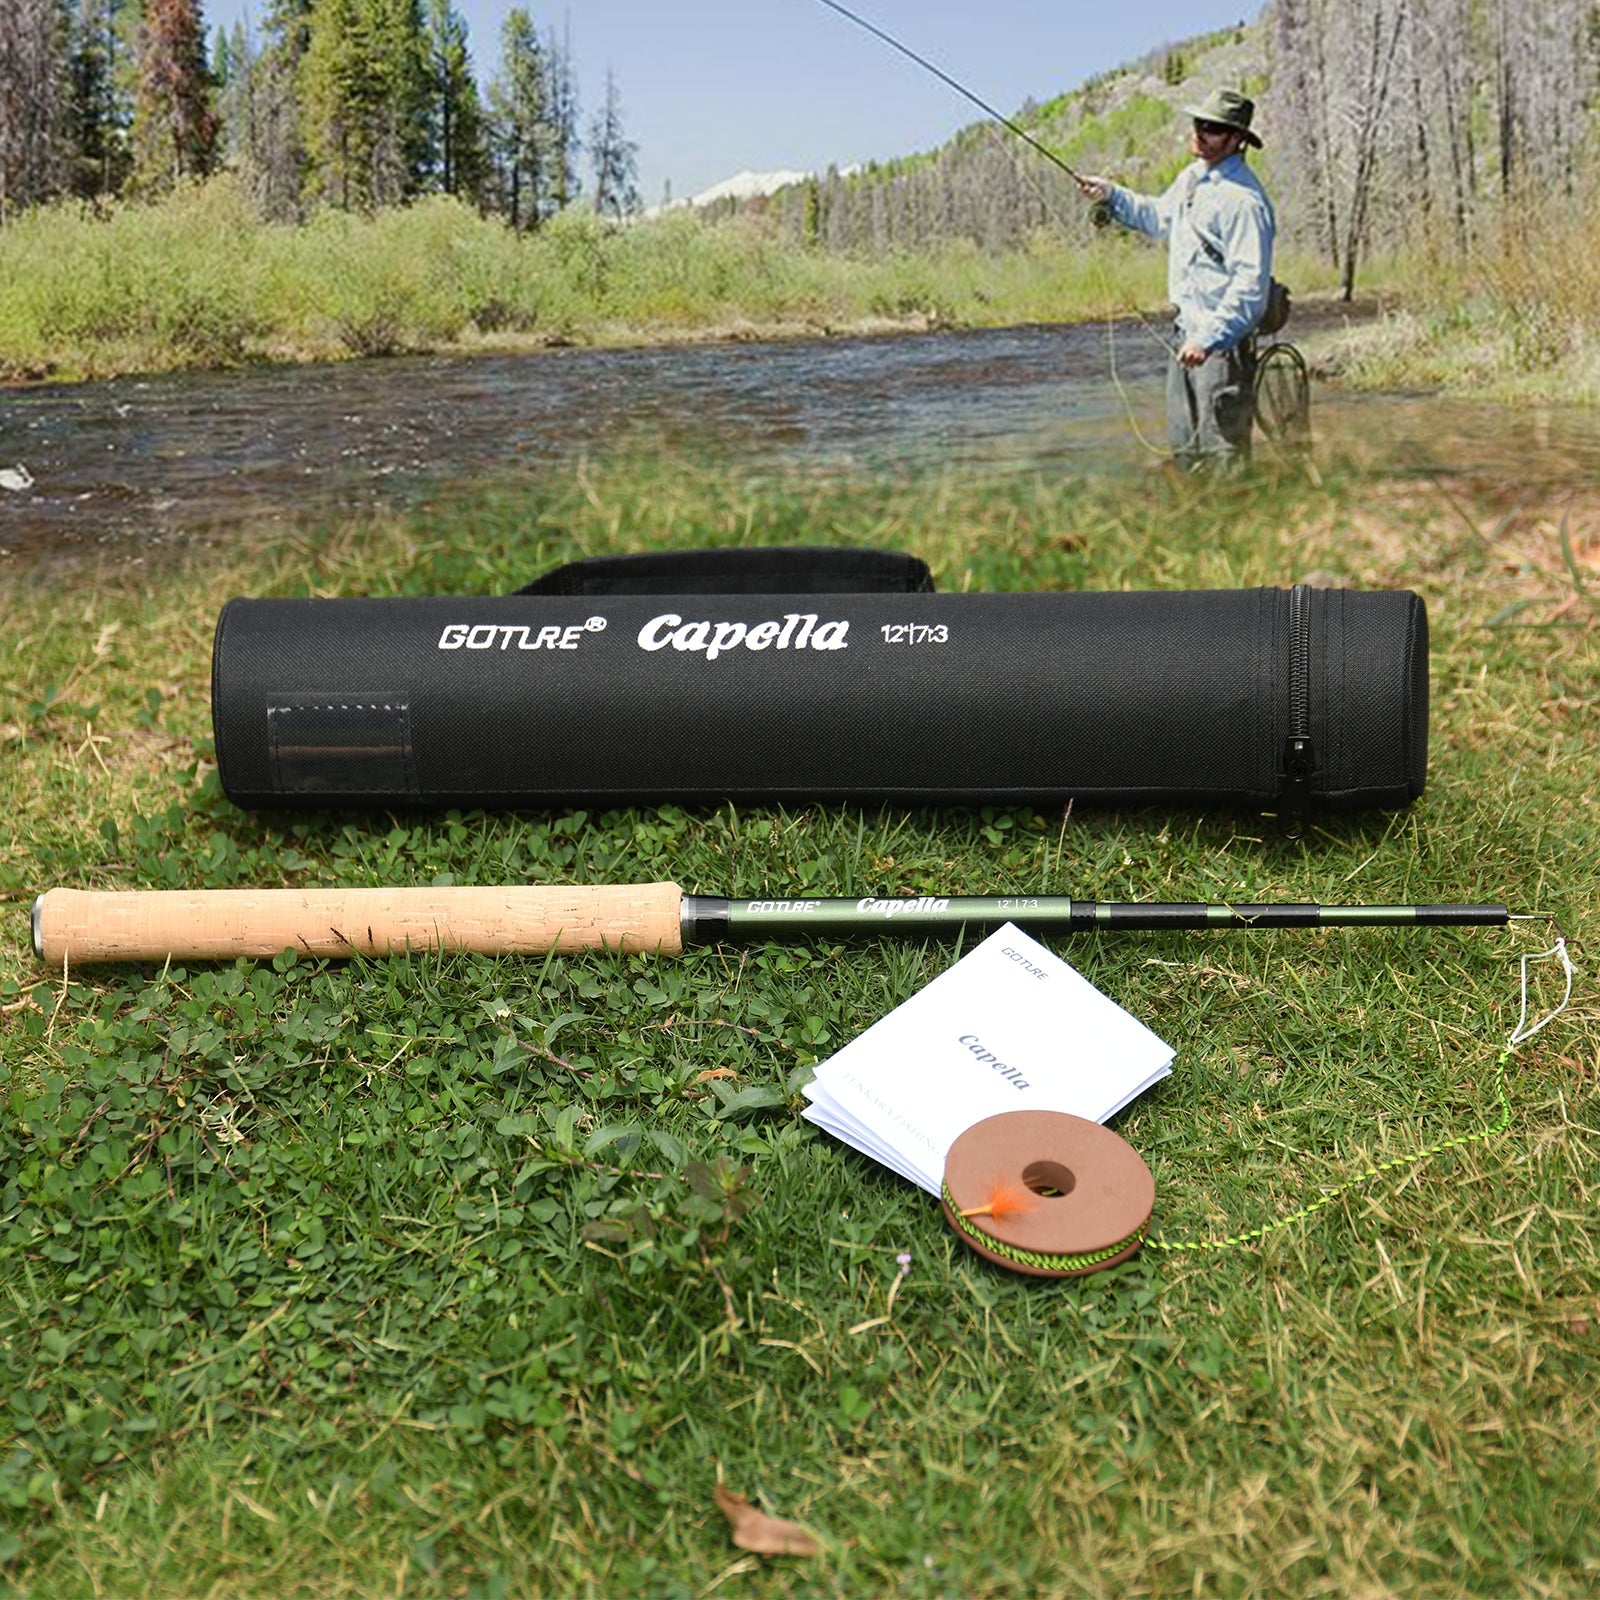 Tenkara Fishing: What Is It and Why Should I Care?